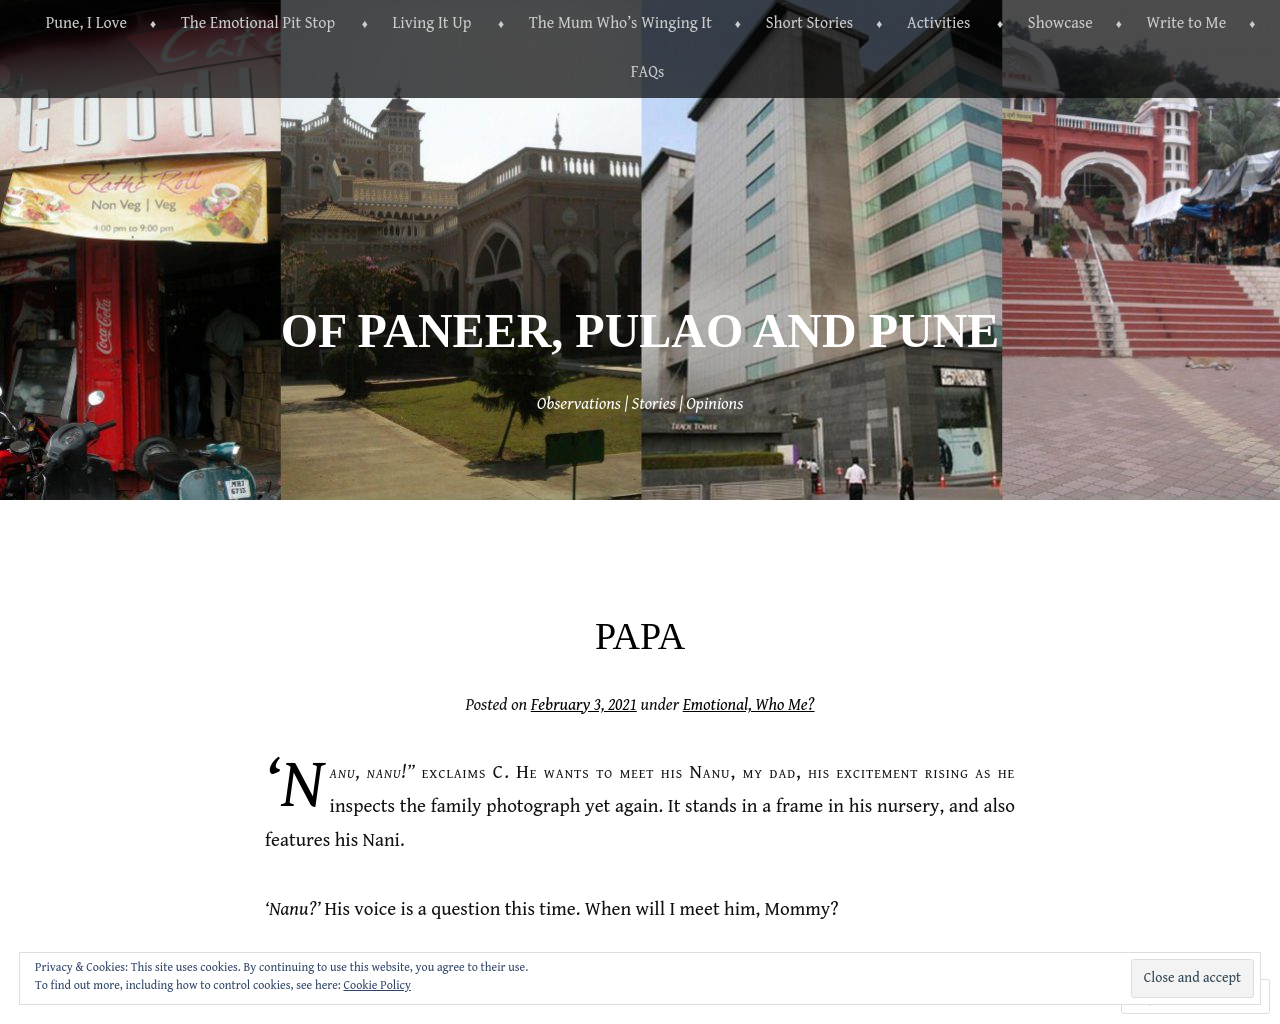 Of Paneer, Pulao and Pune